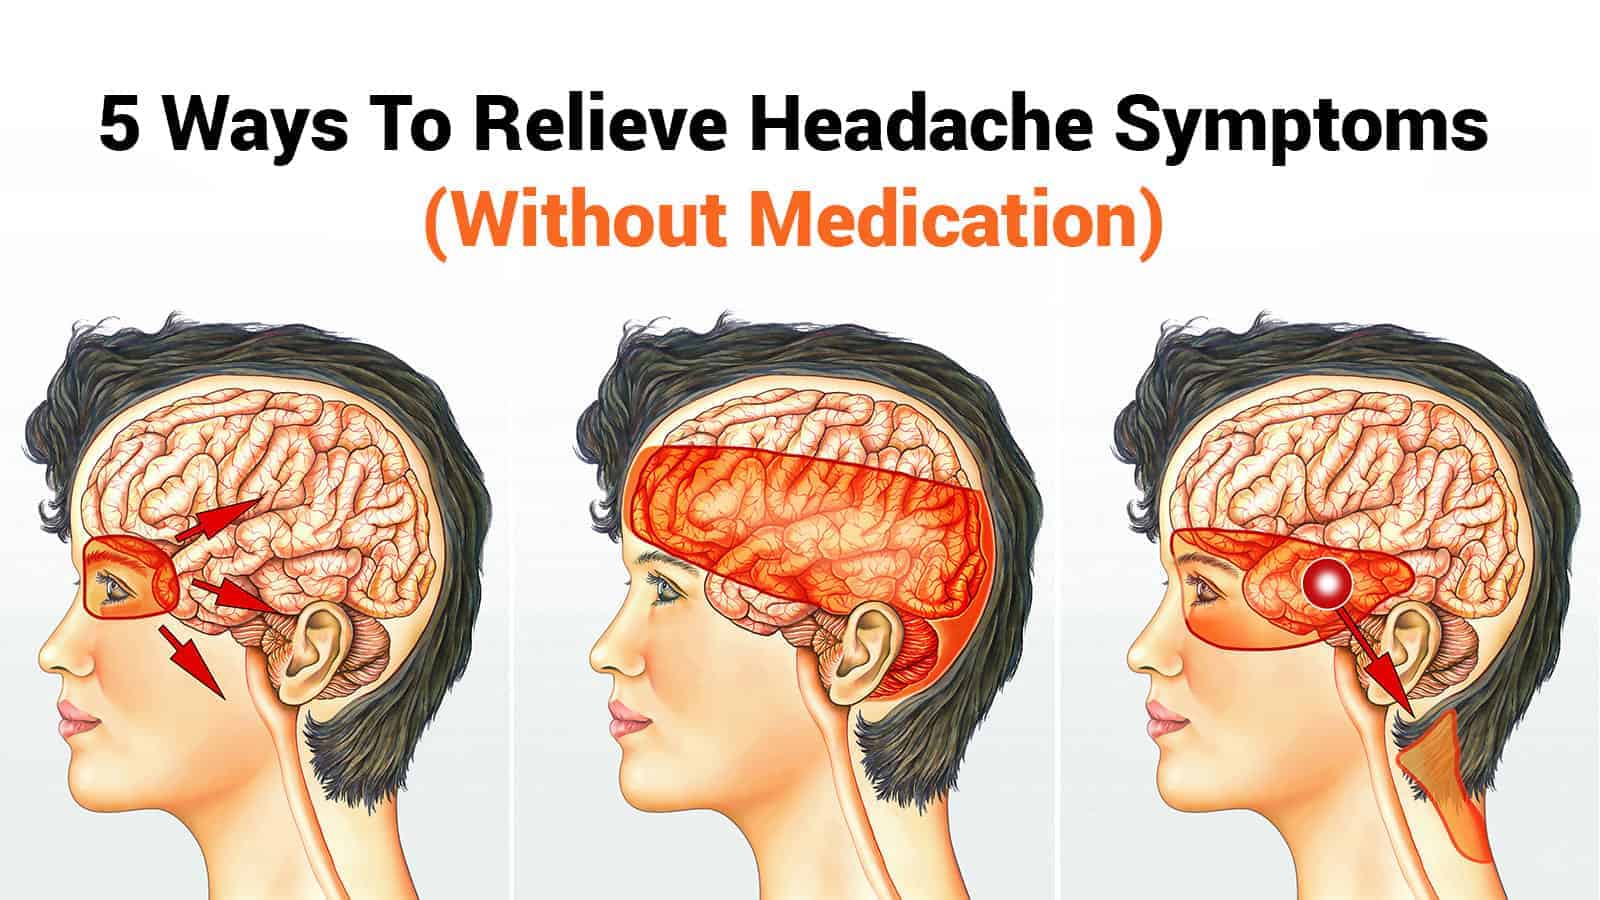 5 Ways To Relieve Headache Symptoms (Without Medication)